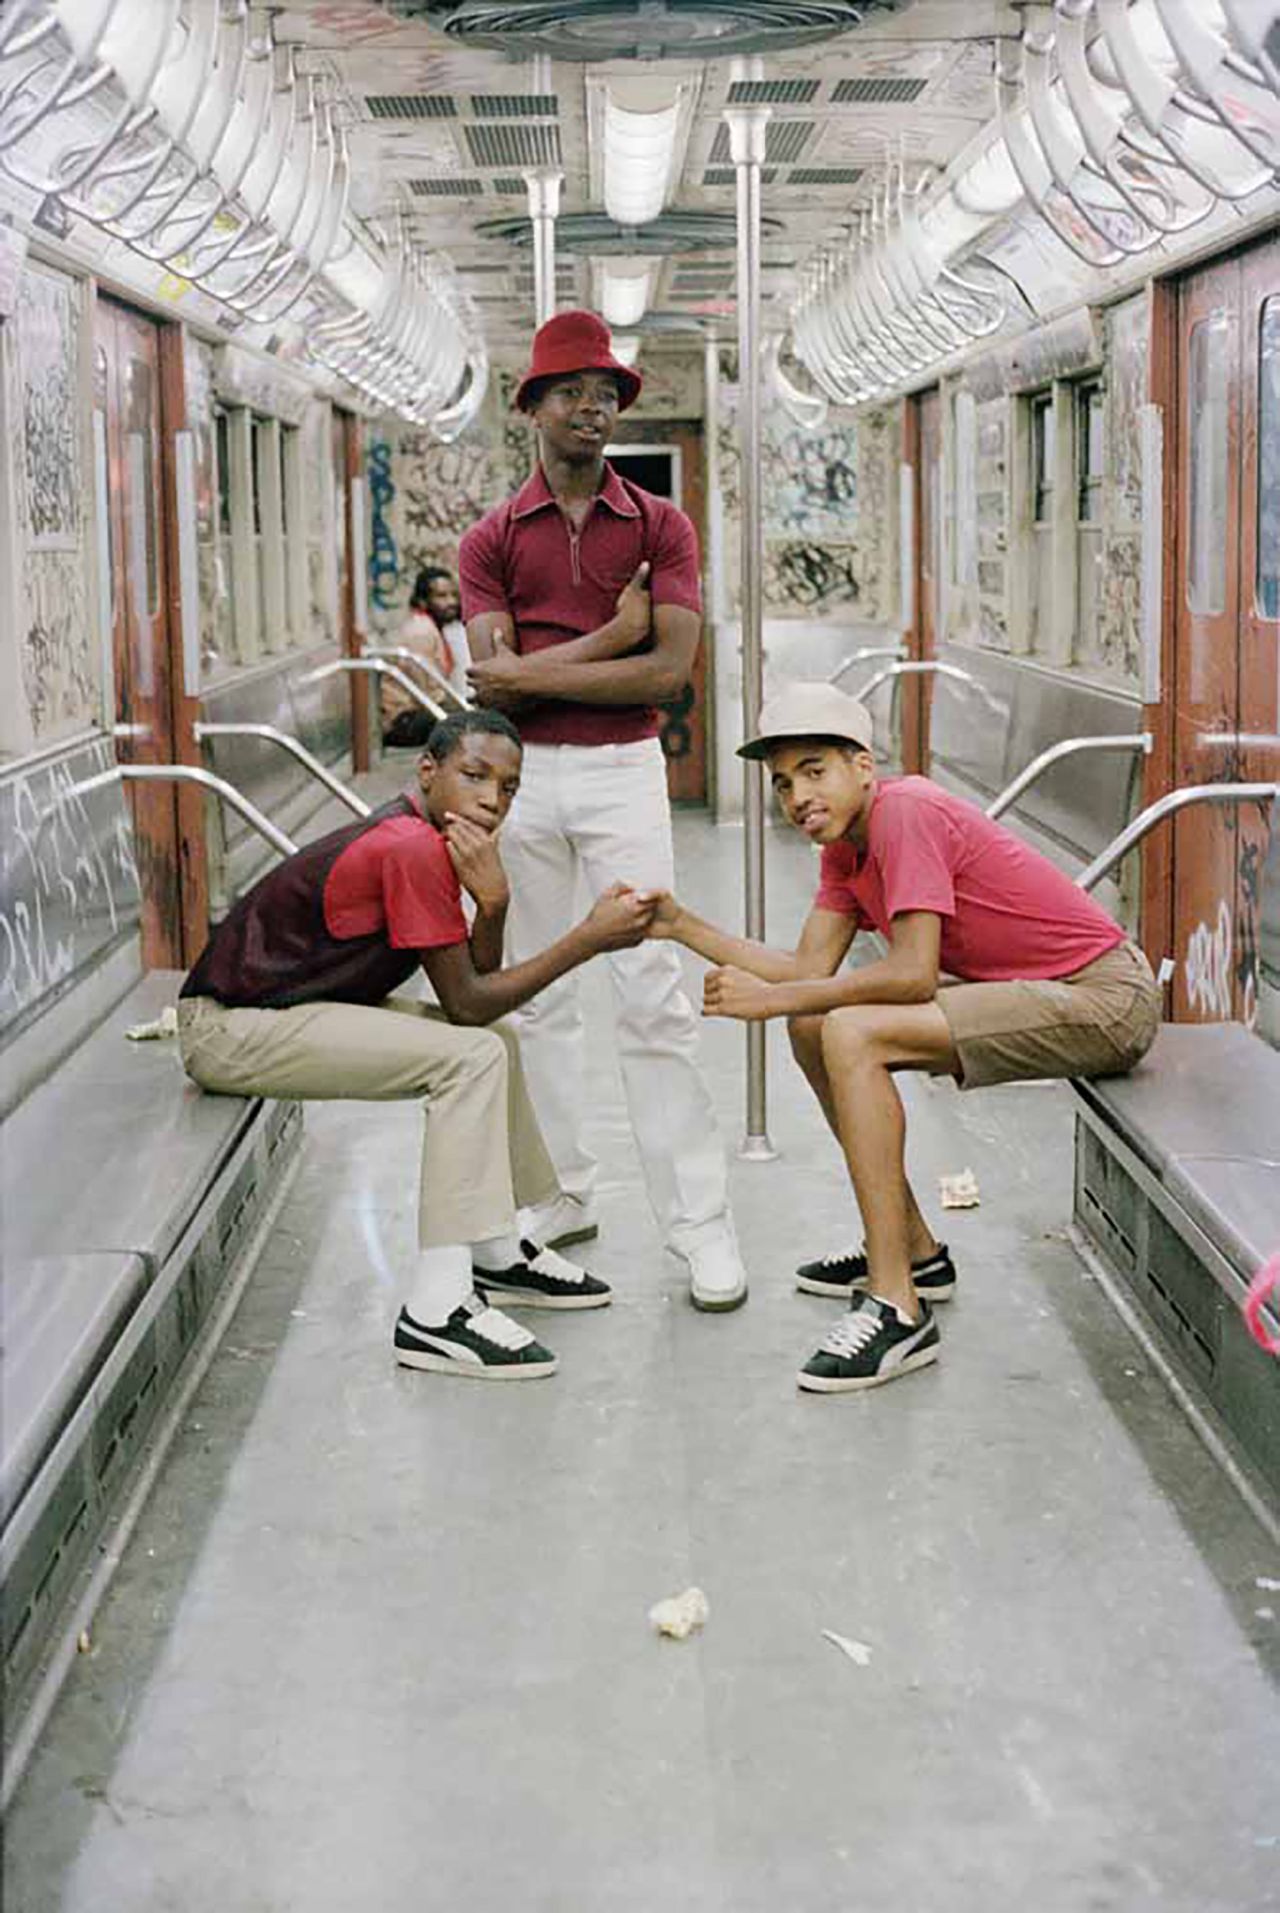 Photographing on the subway was "an ideal self-assignment," Shabazz said of why he began the body of work. Today, he added, "I still find joy in photographing complete strangers on the trains."